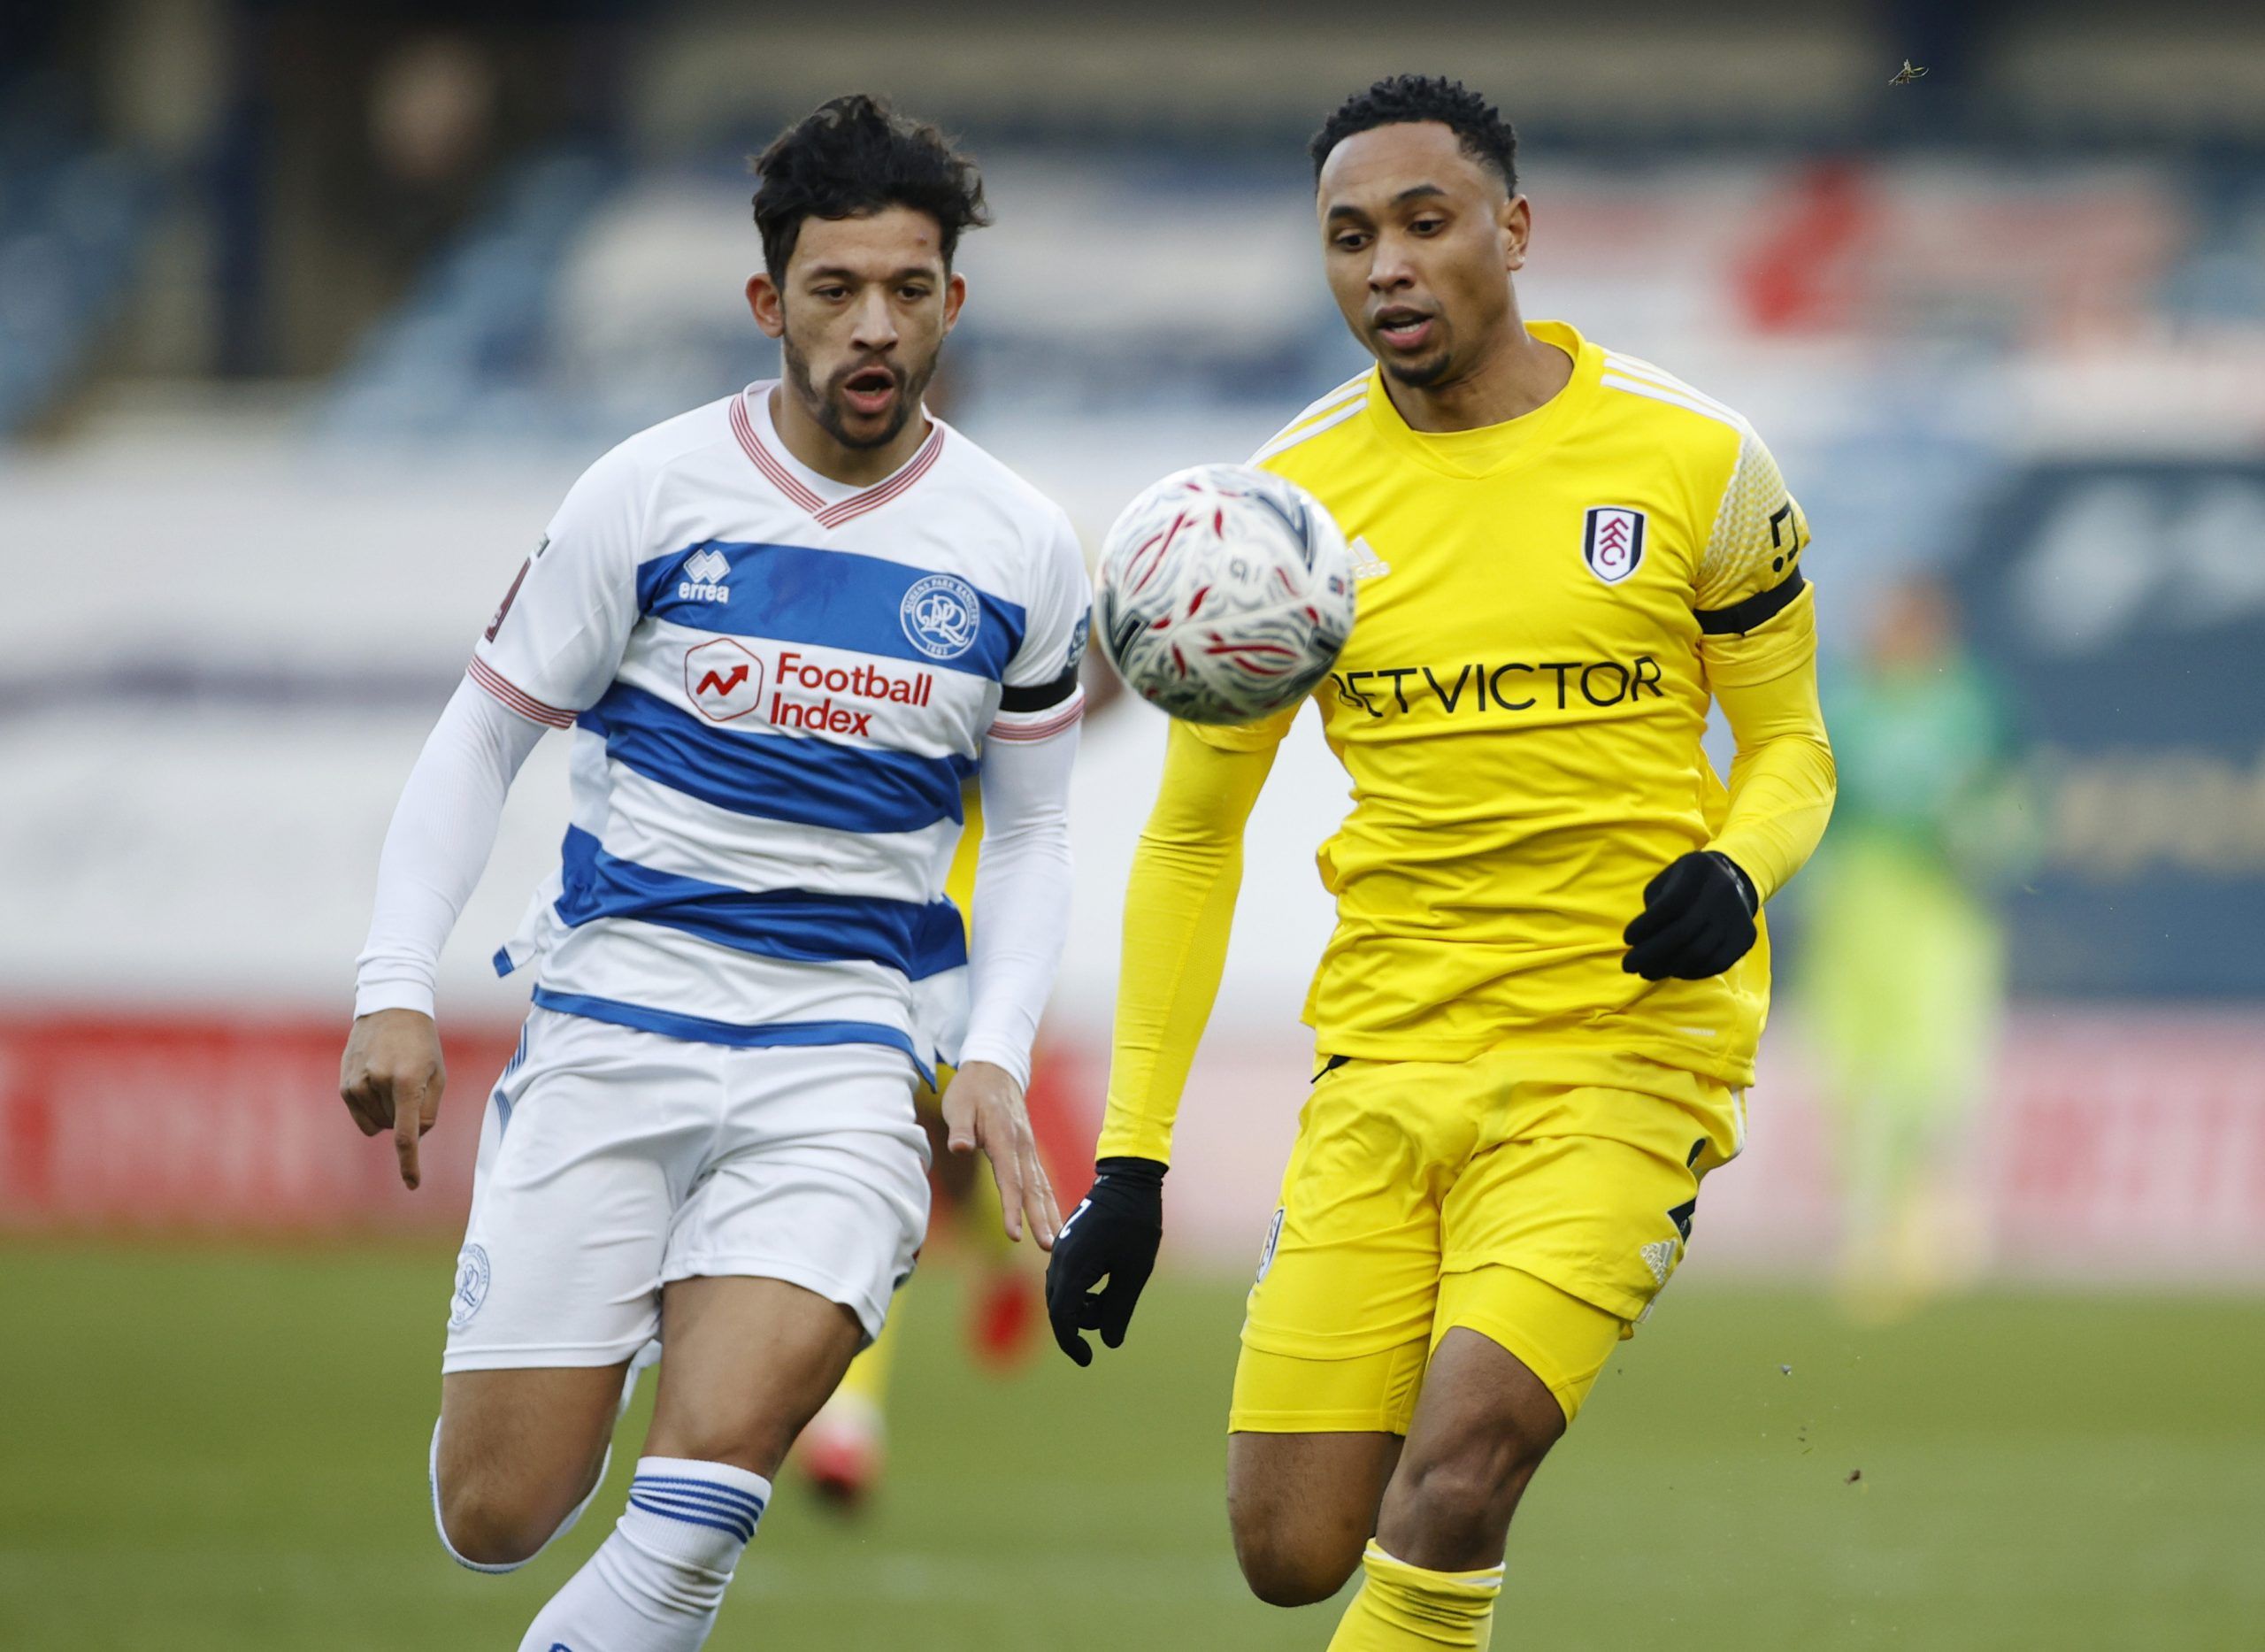 Soccer Football - FA Cup - Third Round - Queens Park Rangers v Fulham - Loftus Road, London, Britain - January 9, 2021 Fulham's Kenny Tete in action with Queens Park Rangers' Macauley Bonne Action Images via Reuters/John Sibley